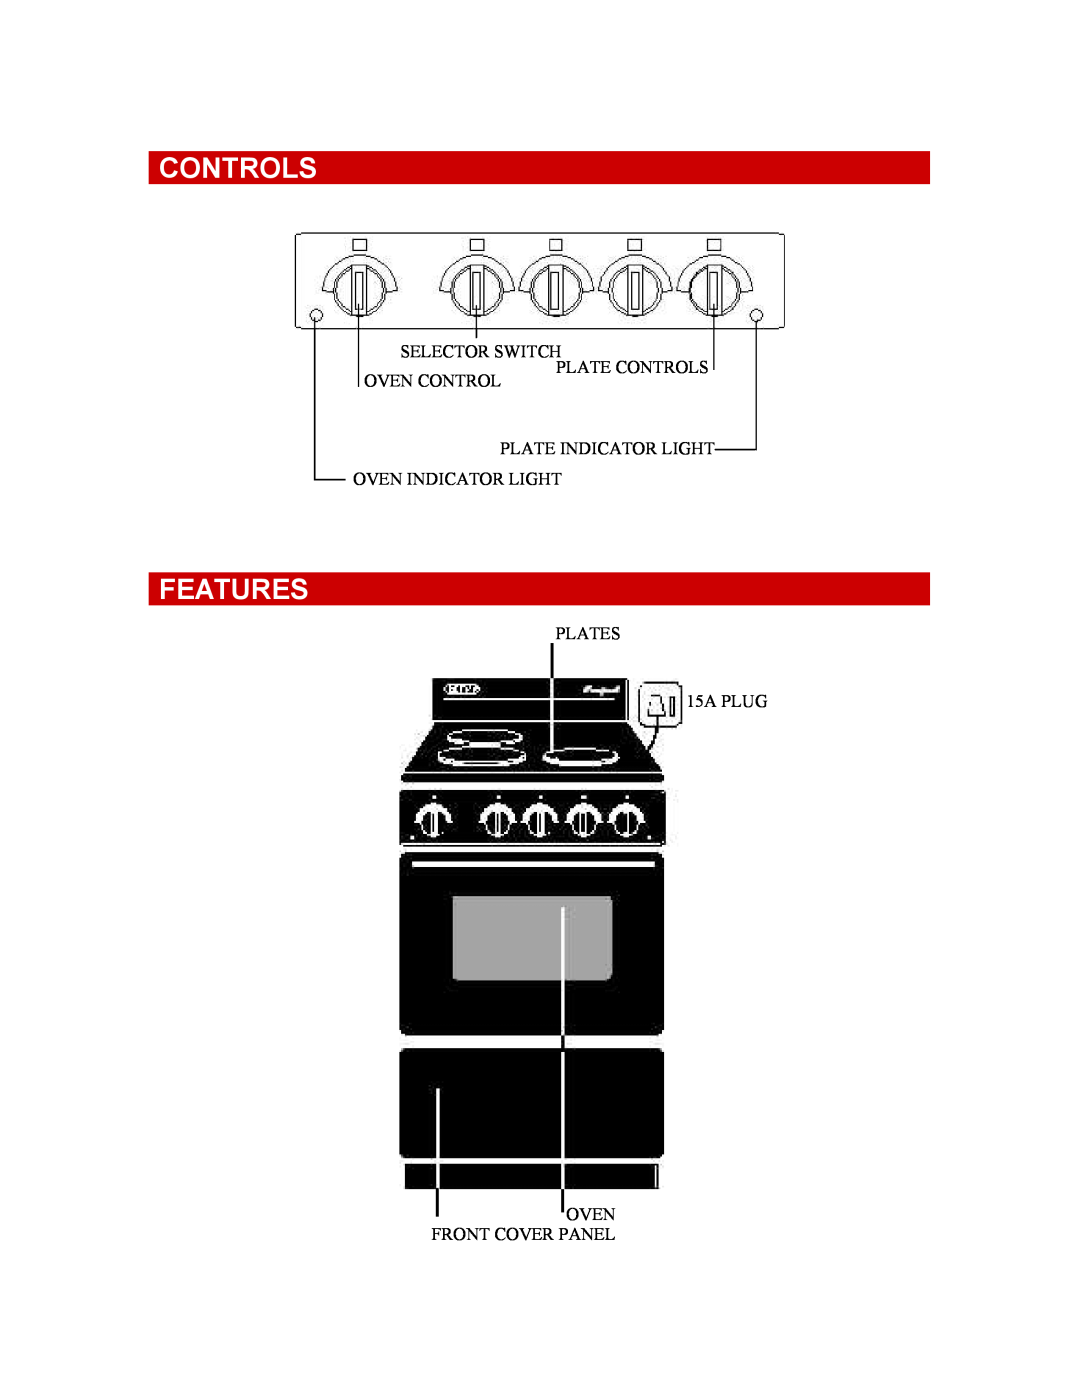 Defy Appliances 501C Features, Selector Switch, Oven Control, Plate Controls, PLATES 15A PLUG OVEN FRONT COVER PANEL 